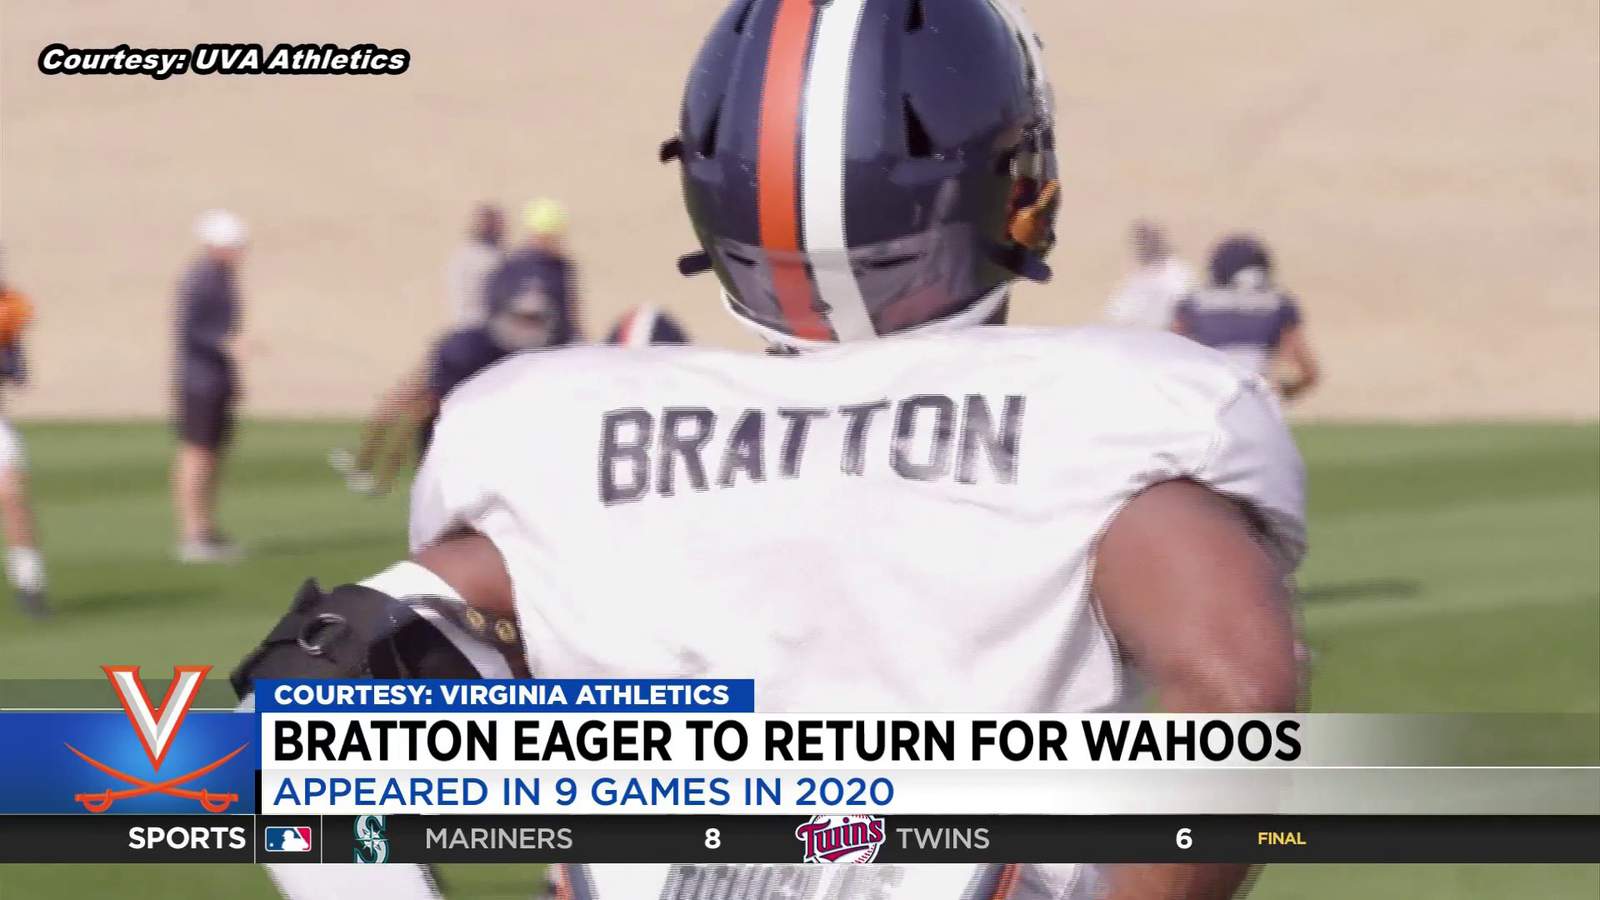 Virginia Cavaliers looking to Bratton to help bolster defensive secondary